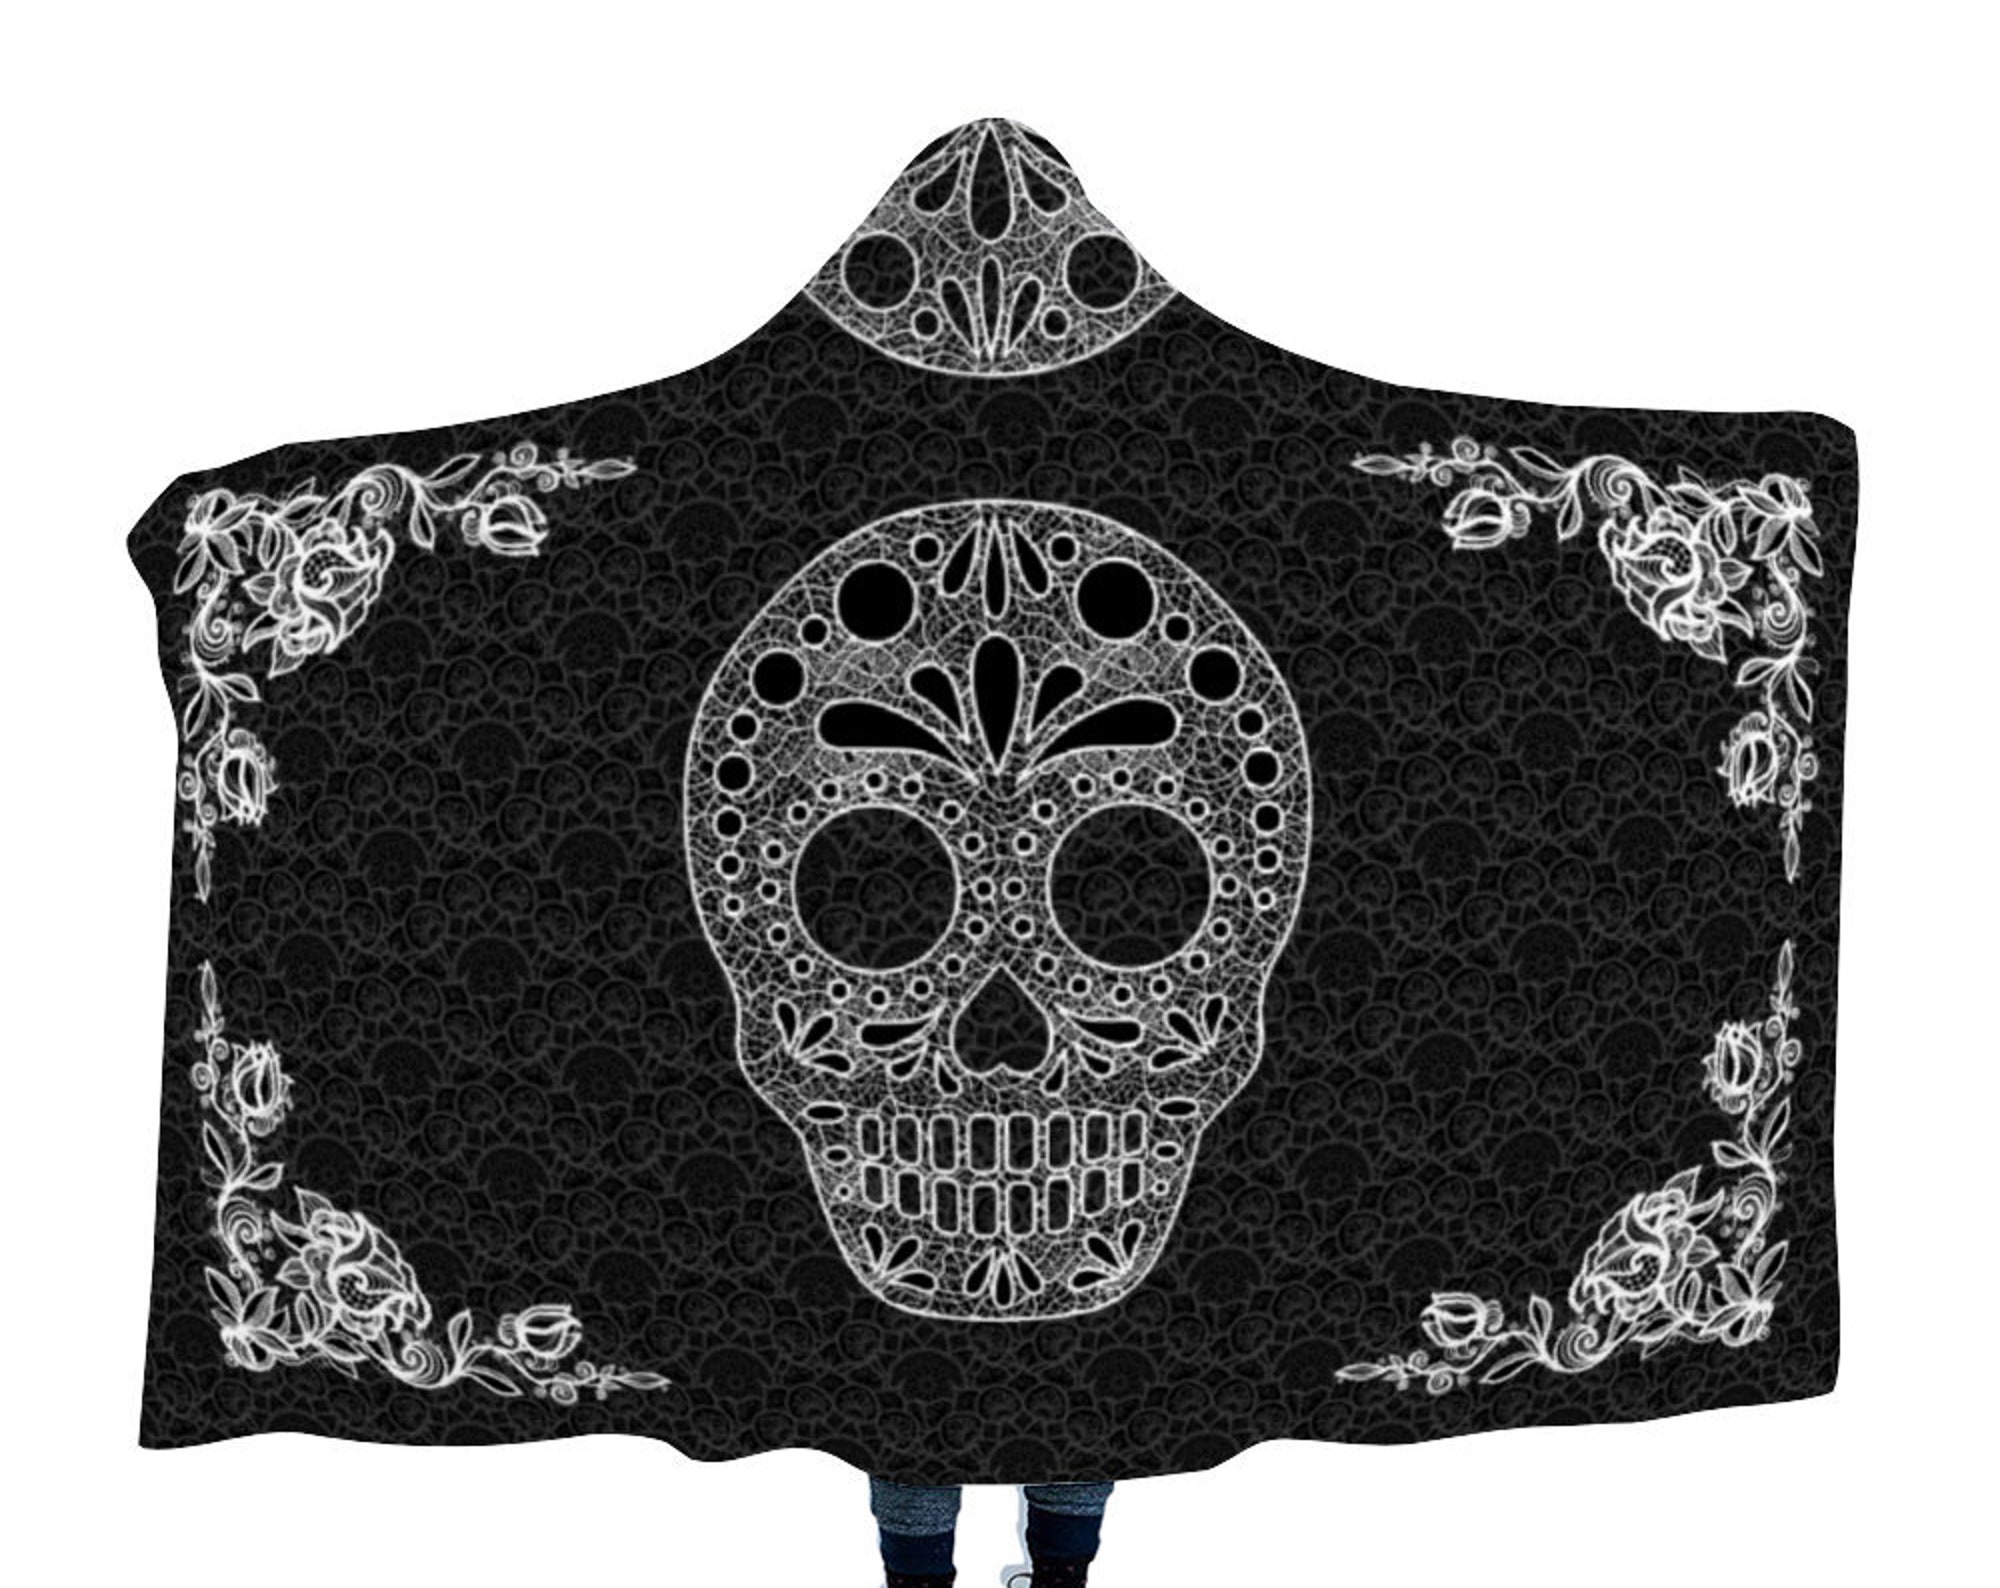 Discover Gothic Hooded Blanket